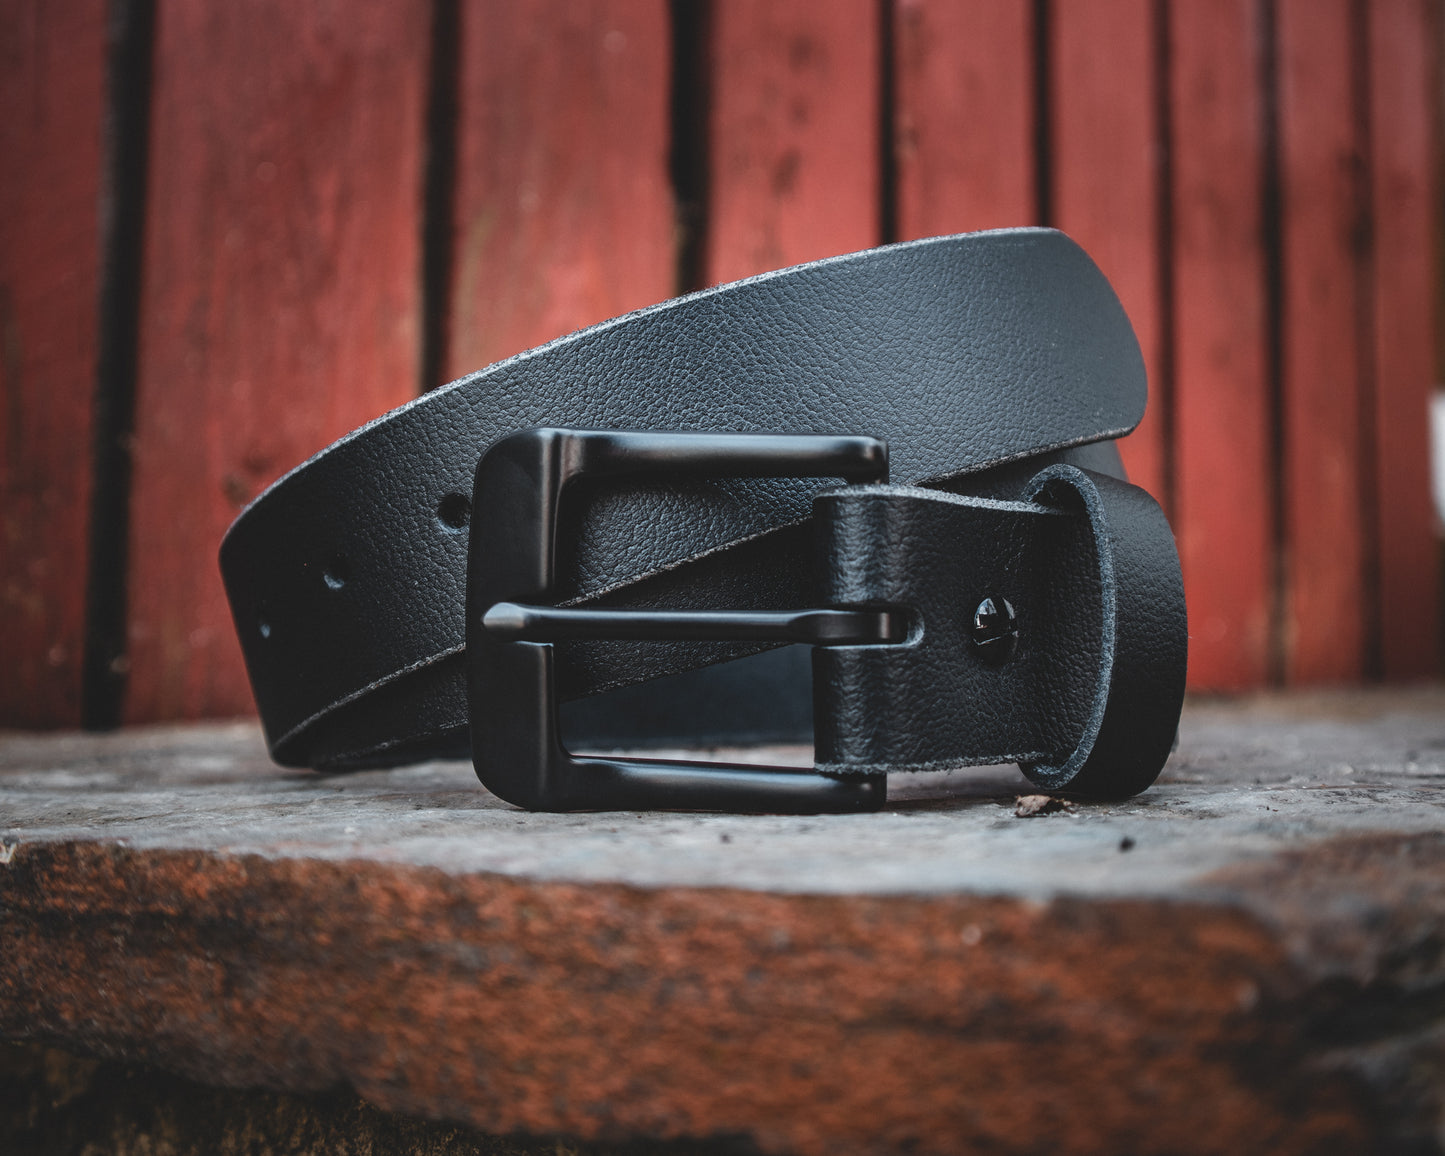 Limited edition! The Black-Out Belt